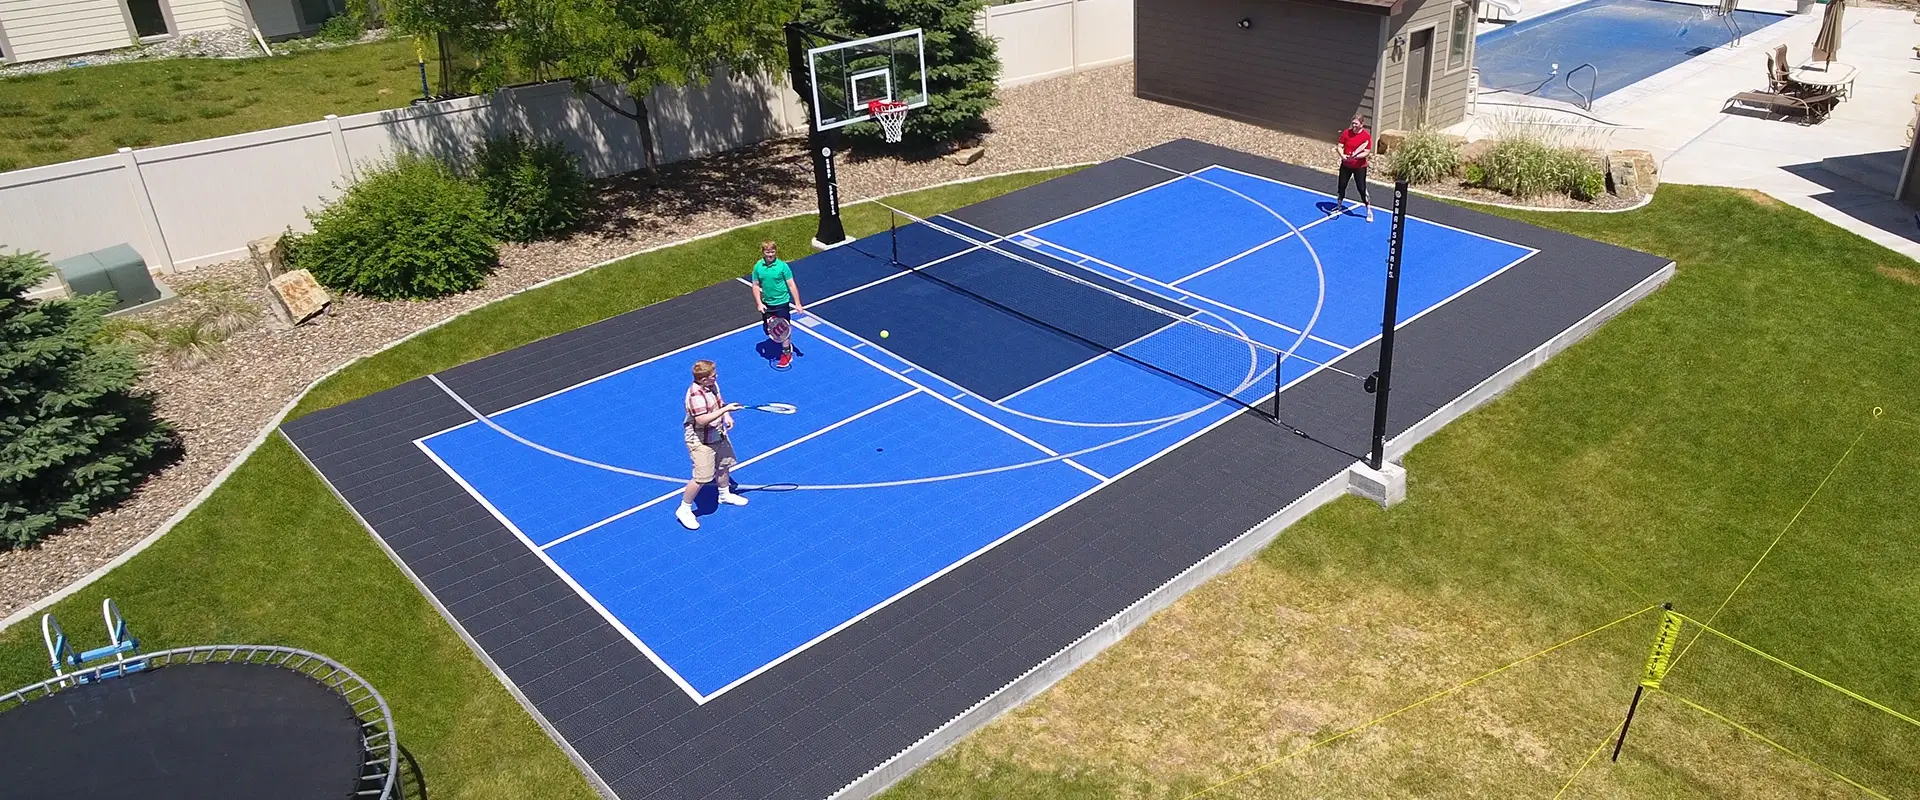 Family plays tennis on their home multi-court